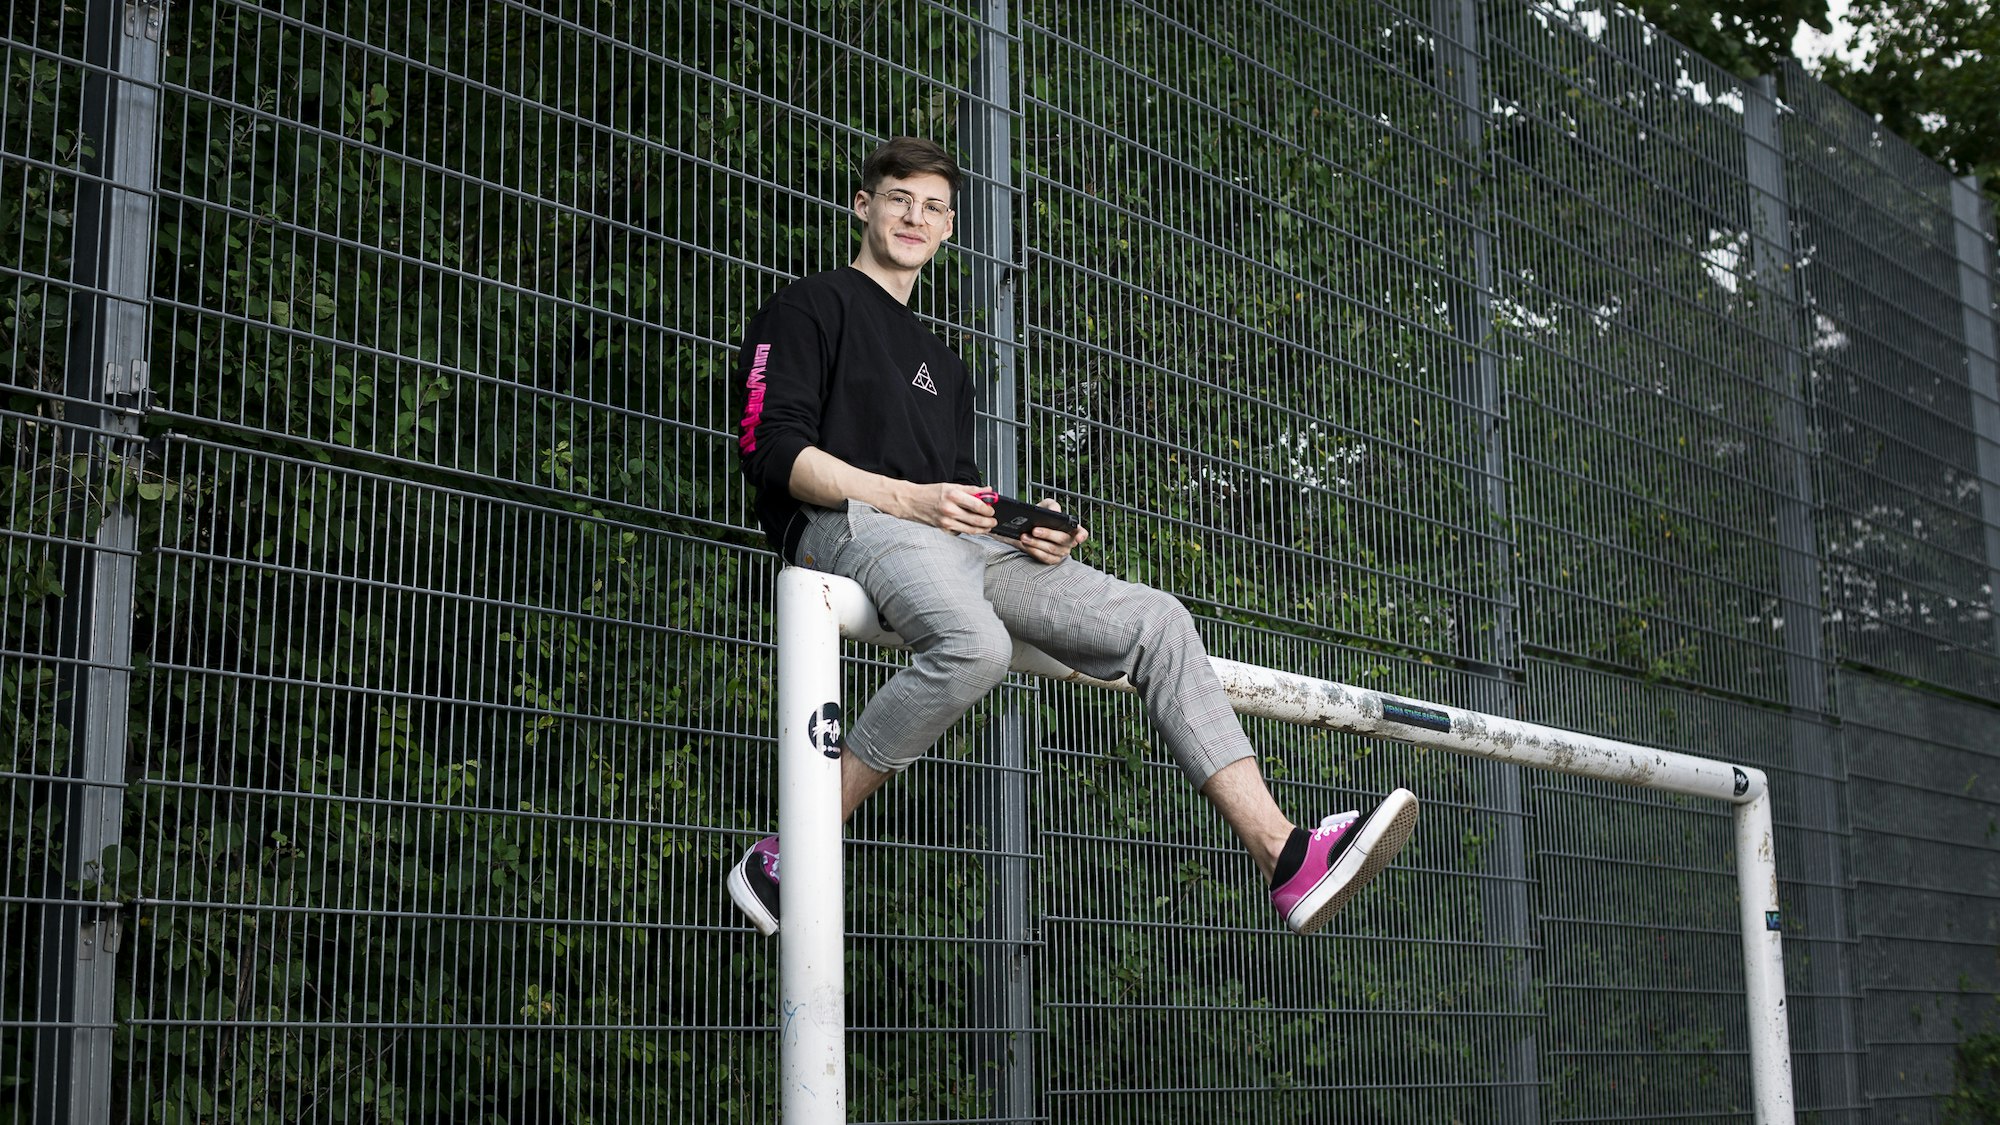 Christoph is sitting on a soccer goal.